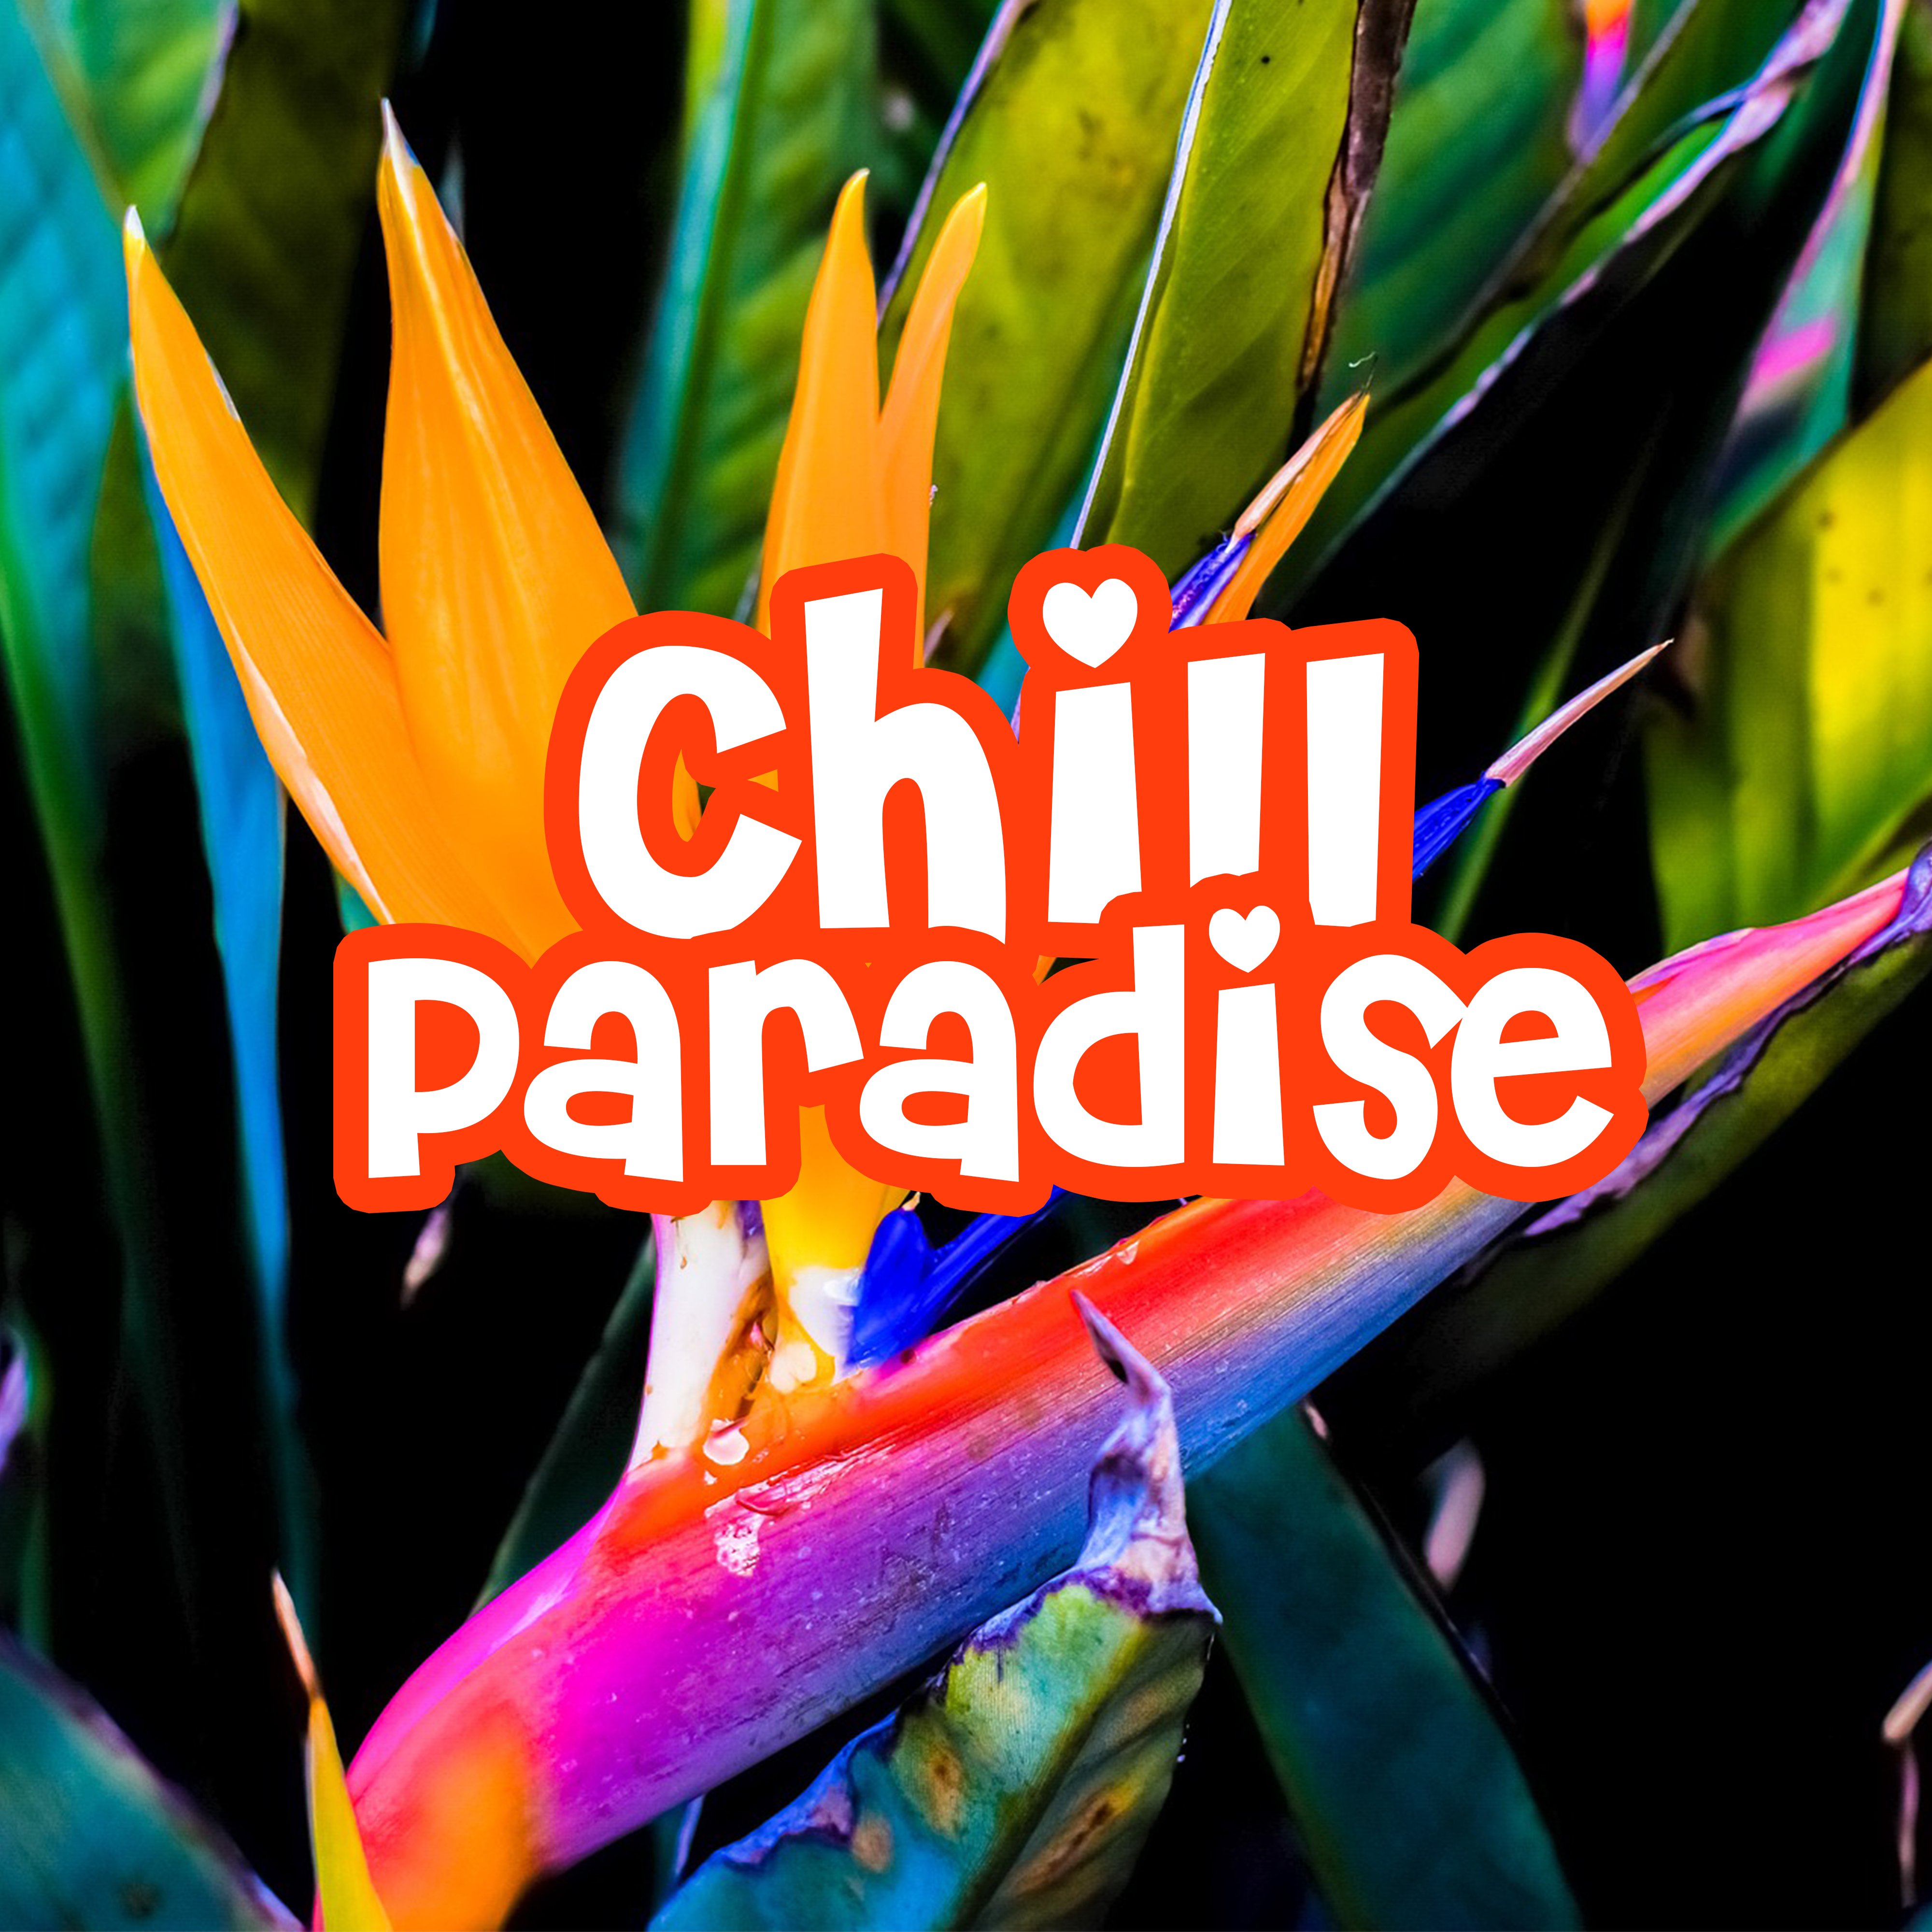 Chill Paradise  Peaceful Waves, Beach Chill, Relax, Summer Vibes, Ocean Dreams, Soft Music, Sounds of Sea, Bar Chill Out